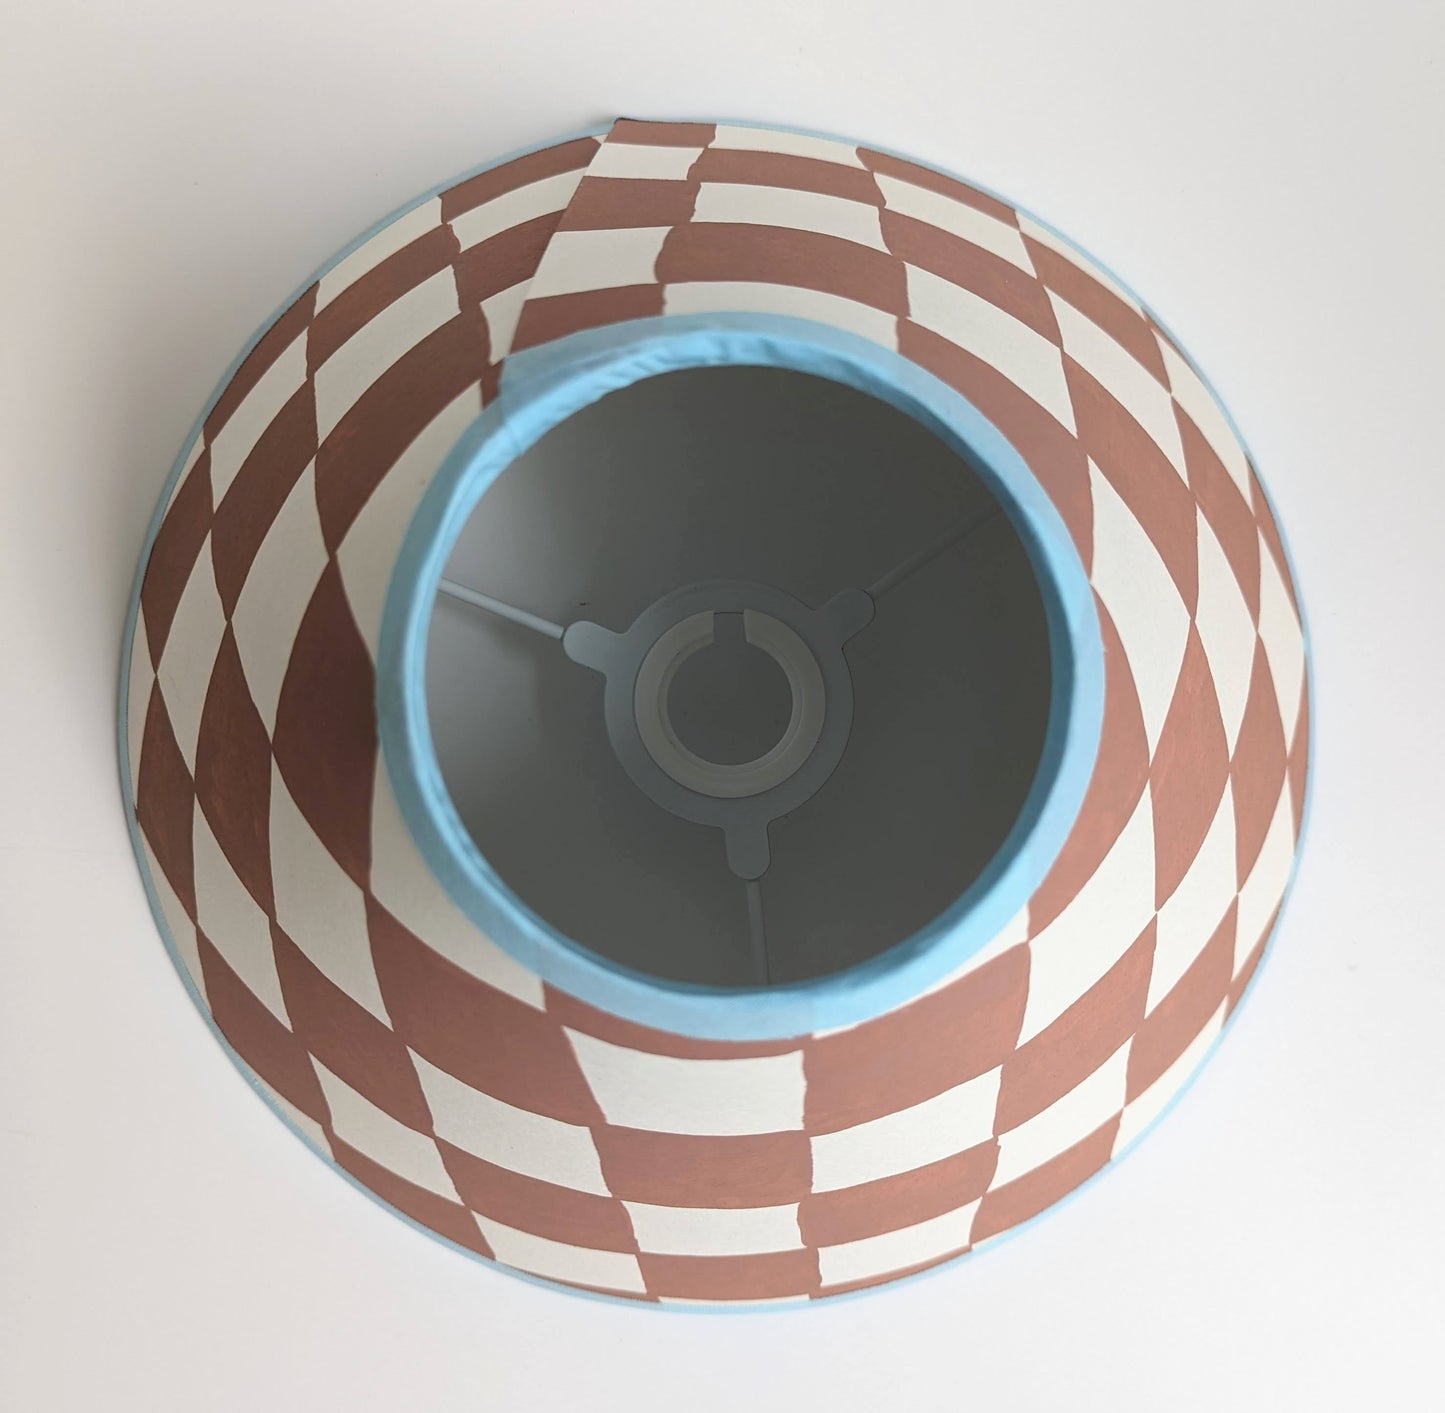 Rust & Blue Checkerboard Hand Painted Lampshade